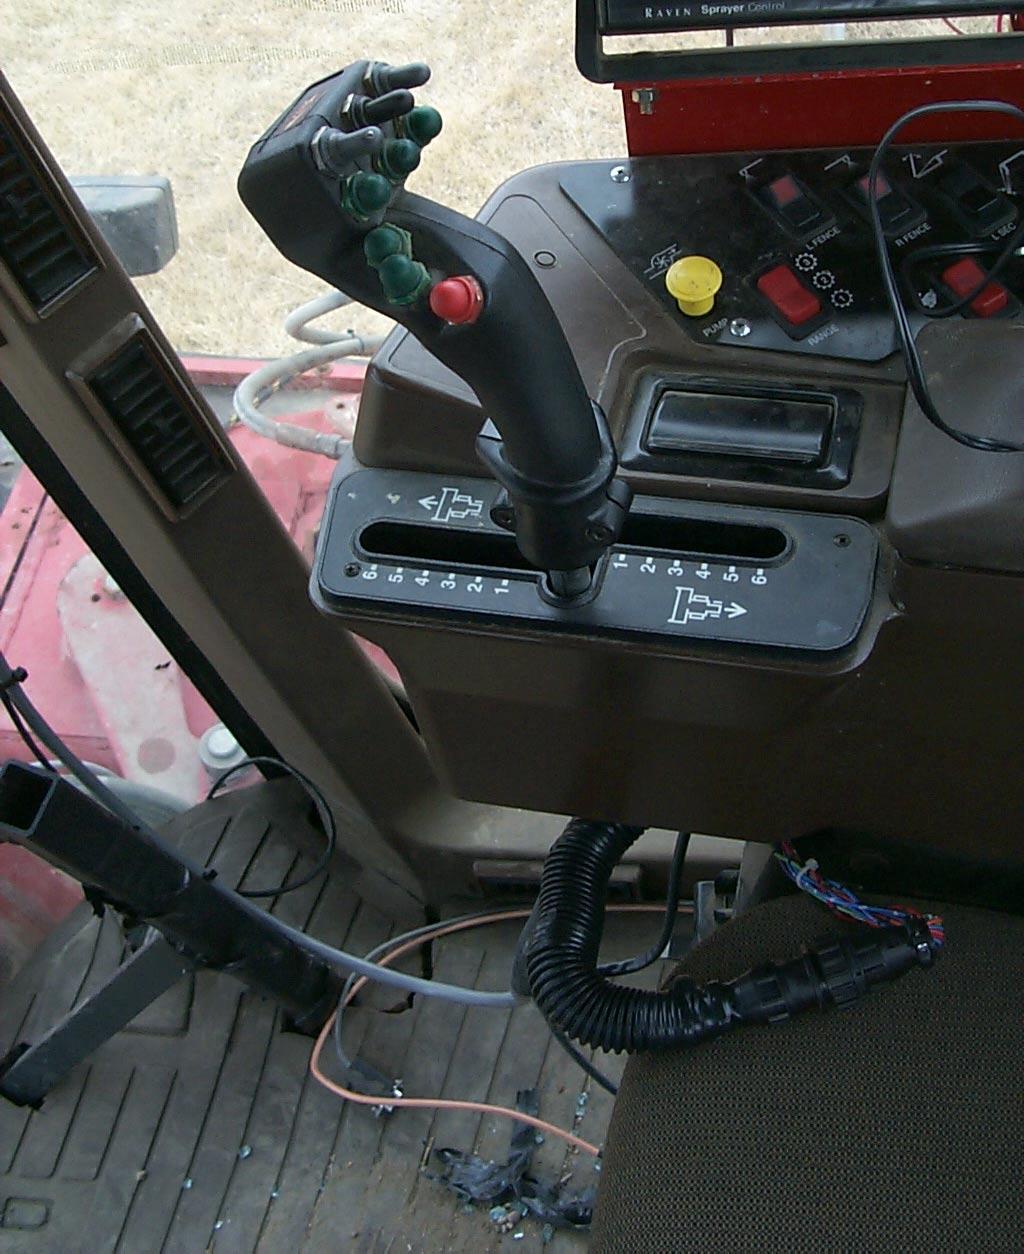 2. Locate the 16-pin AMP connector in the cable from the joystick in the cab. Connect the UC4 power cable (Item C10) between this connection.